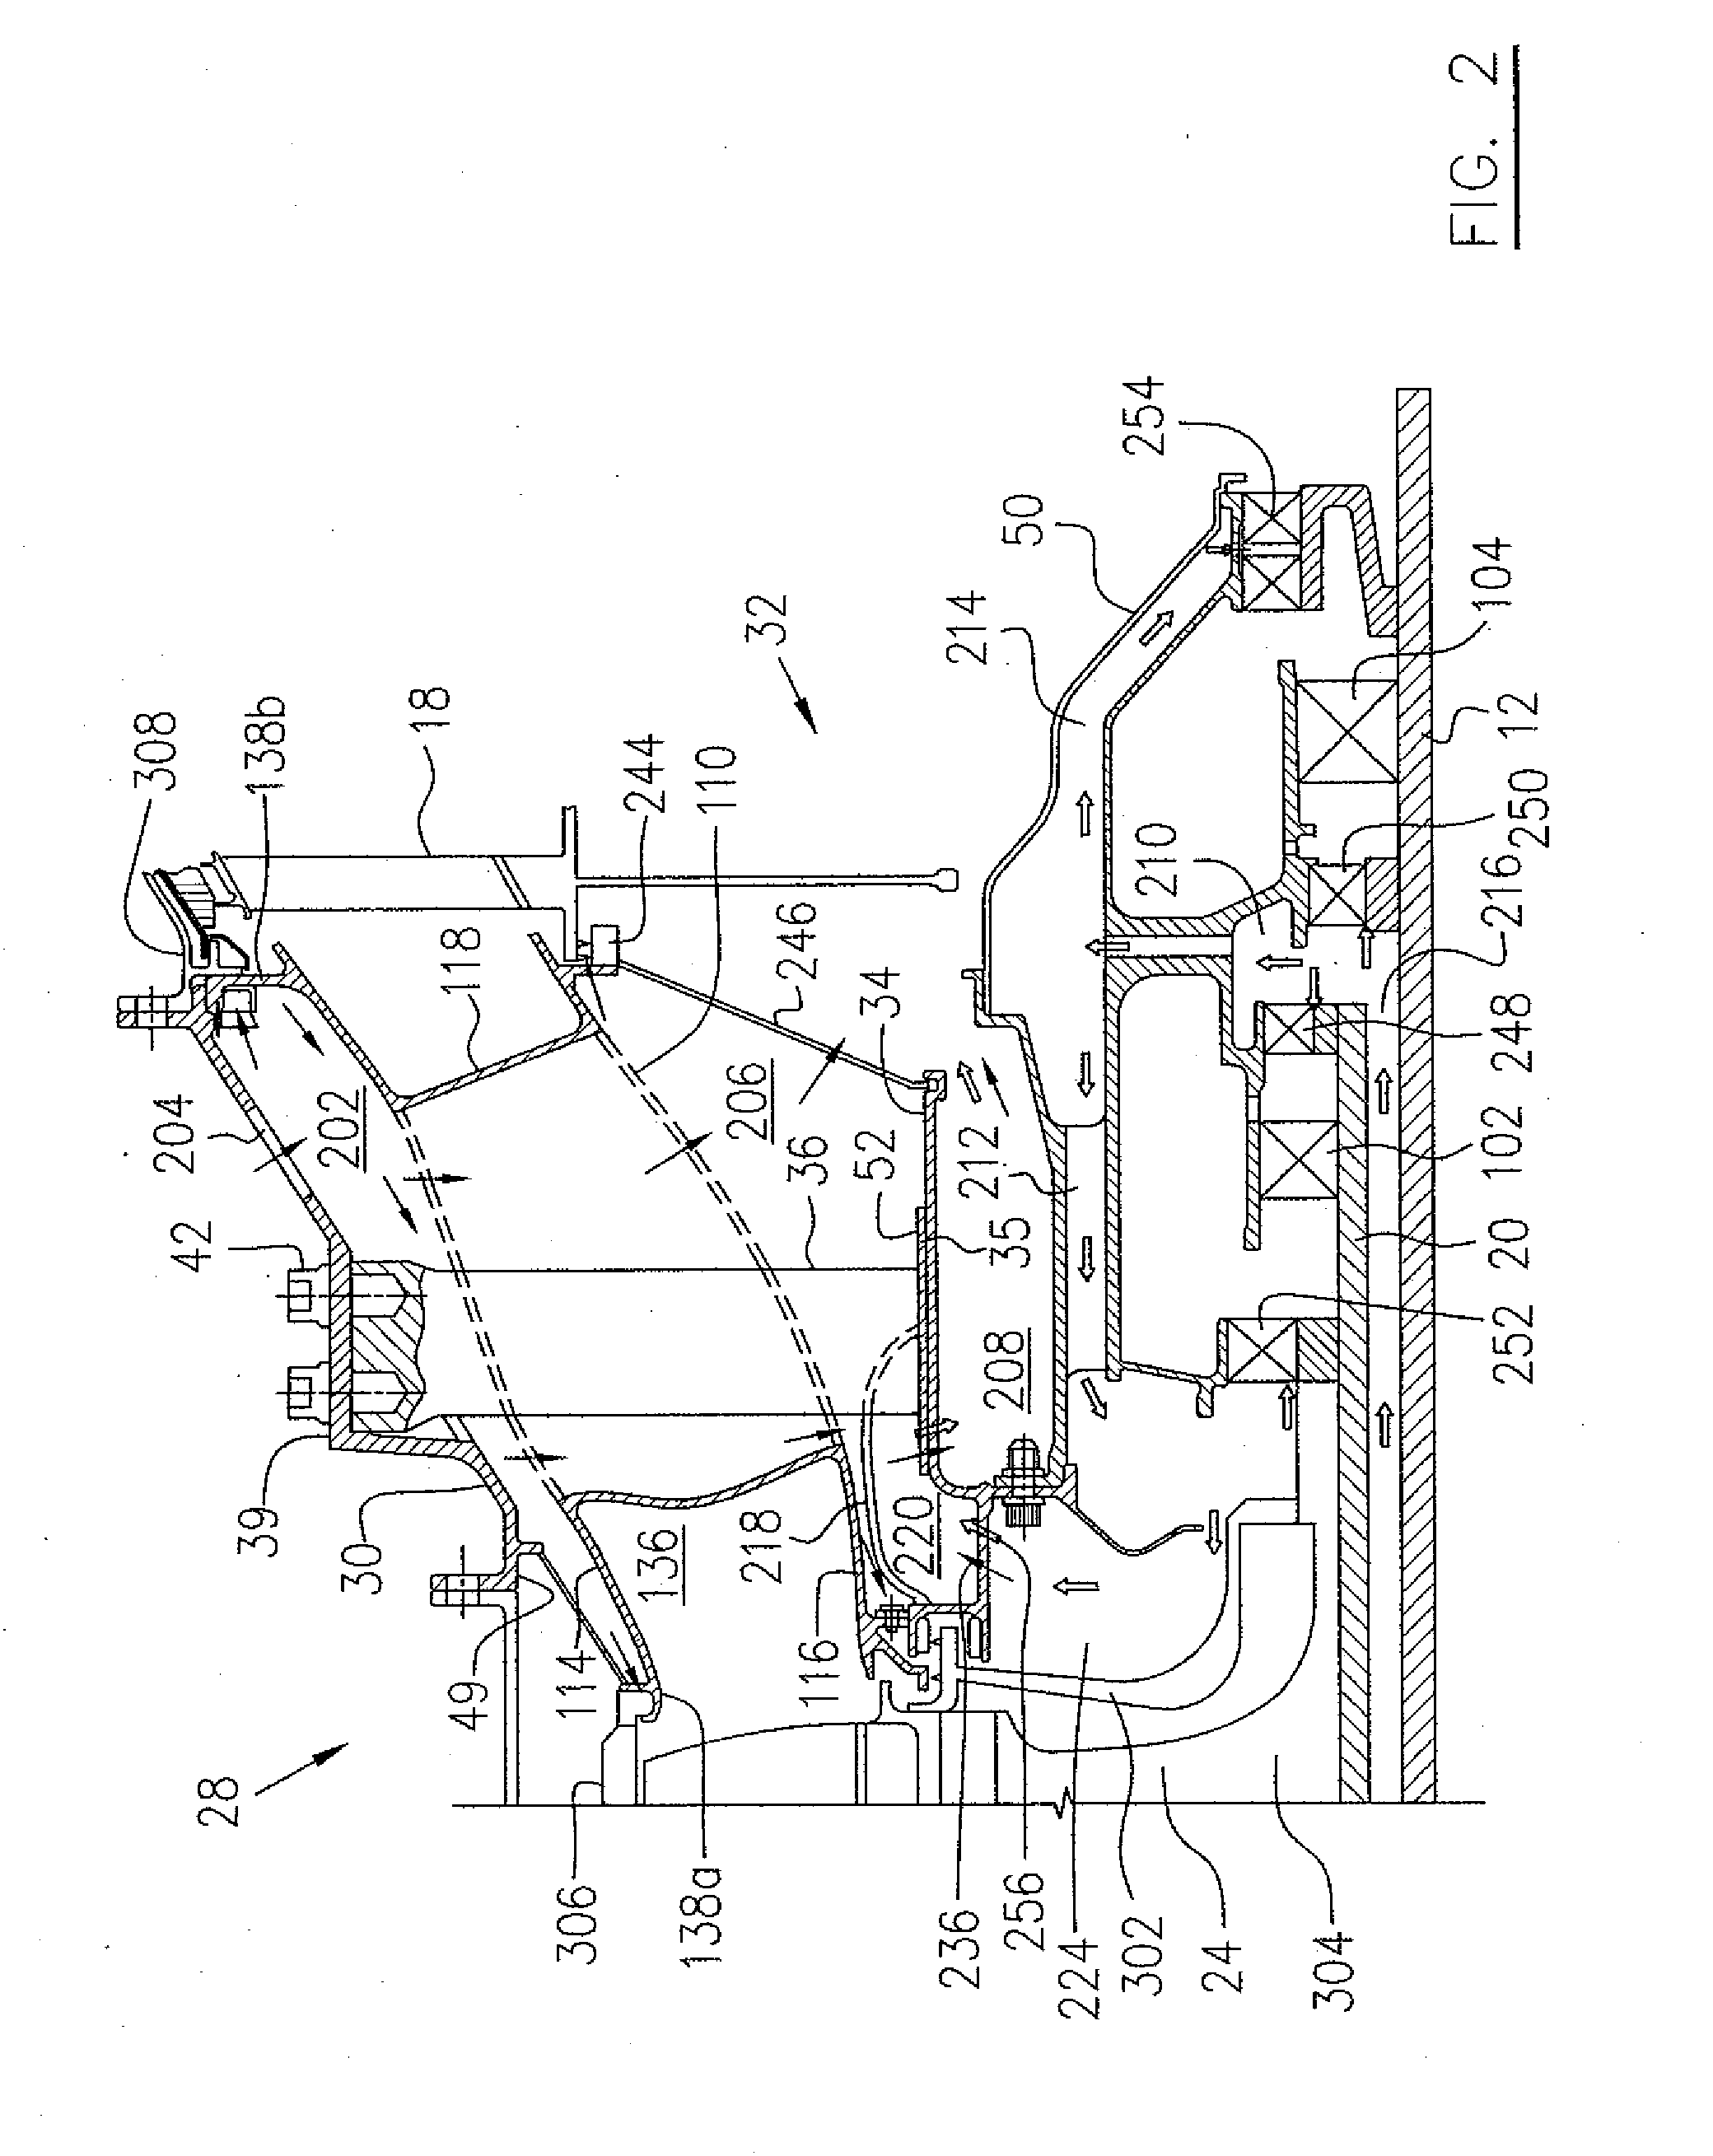 Cooling air system for mid turbine frame